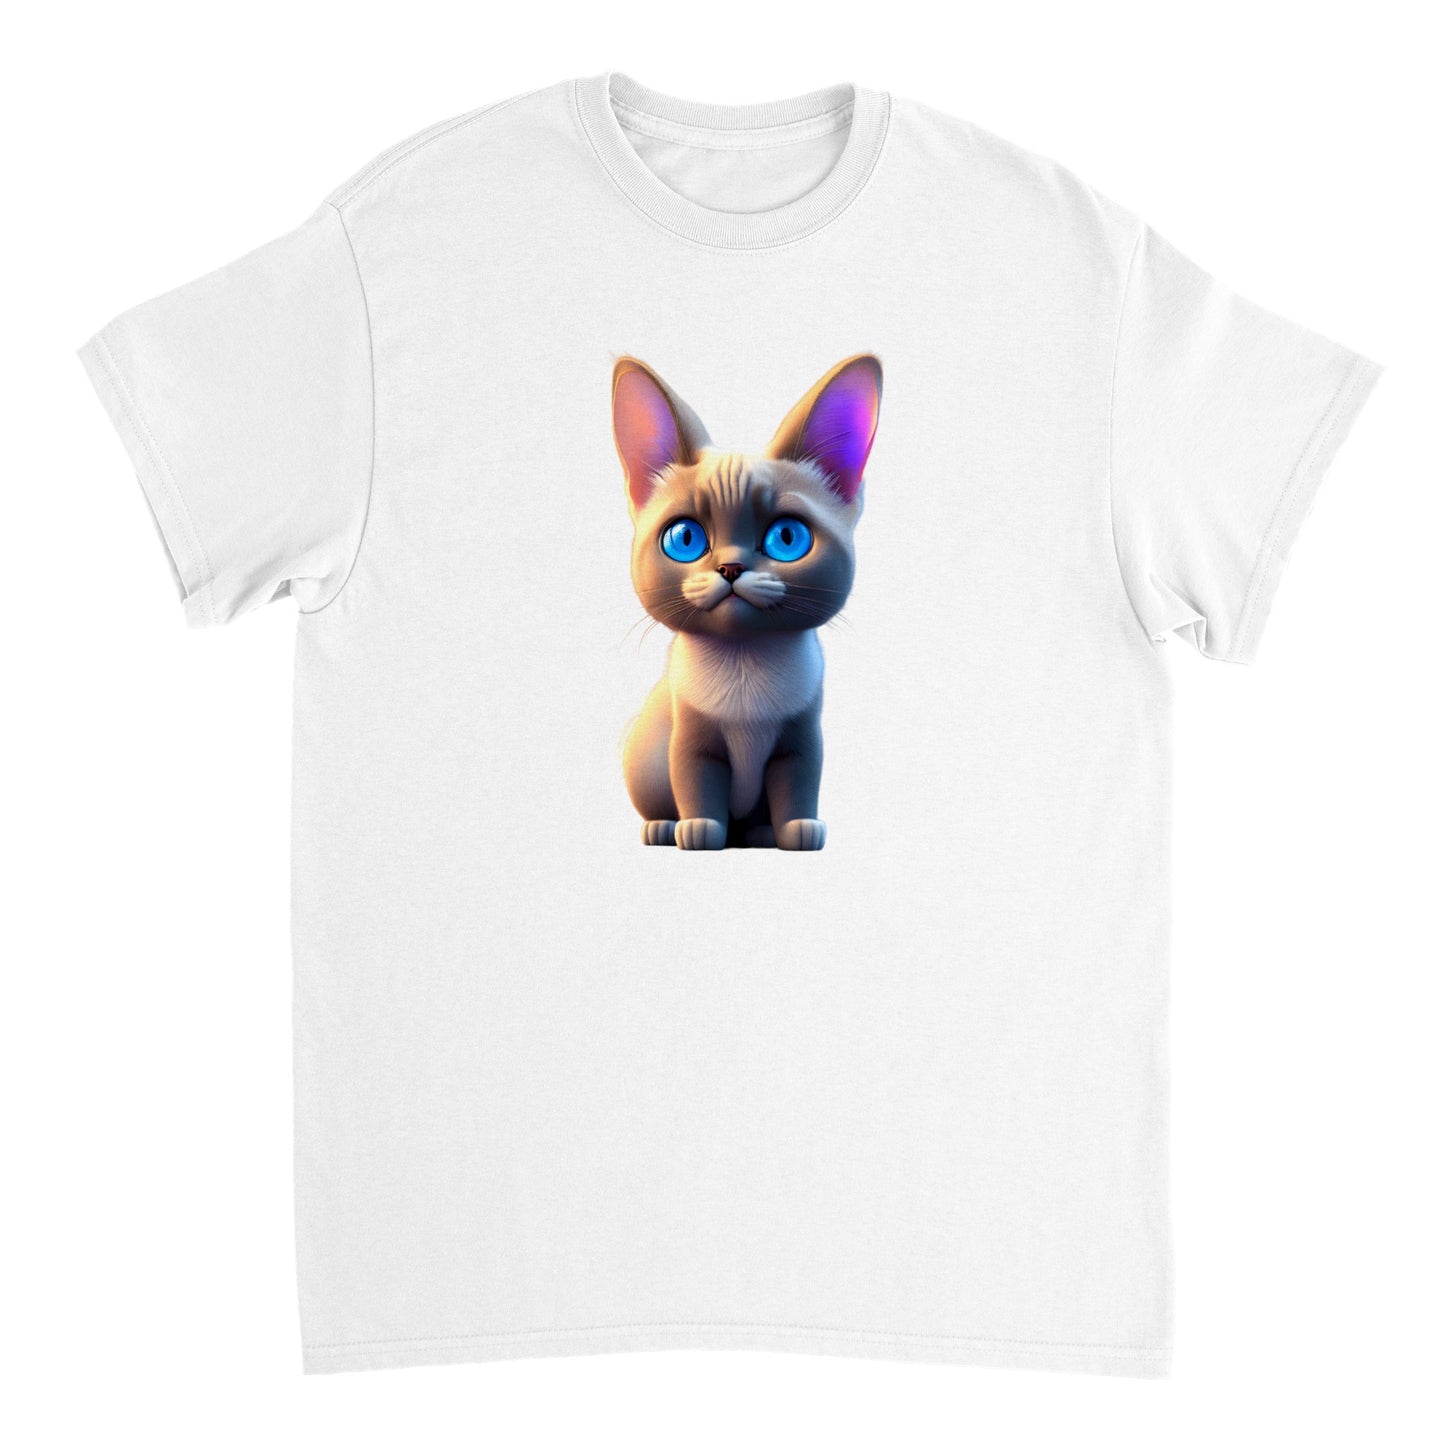 Adorable, Cool, Cute Cats and Kittens Toy - Heavyweight Unisex Crewneck T-shirt 30